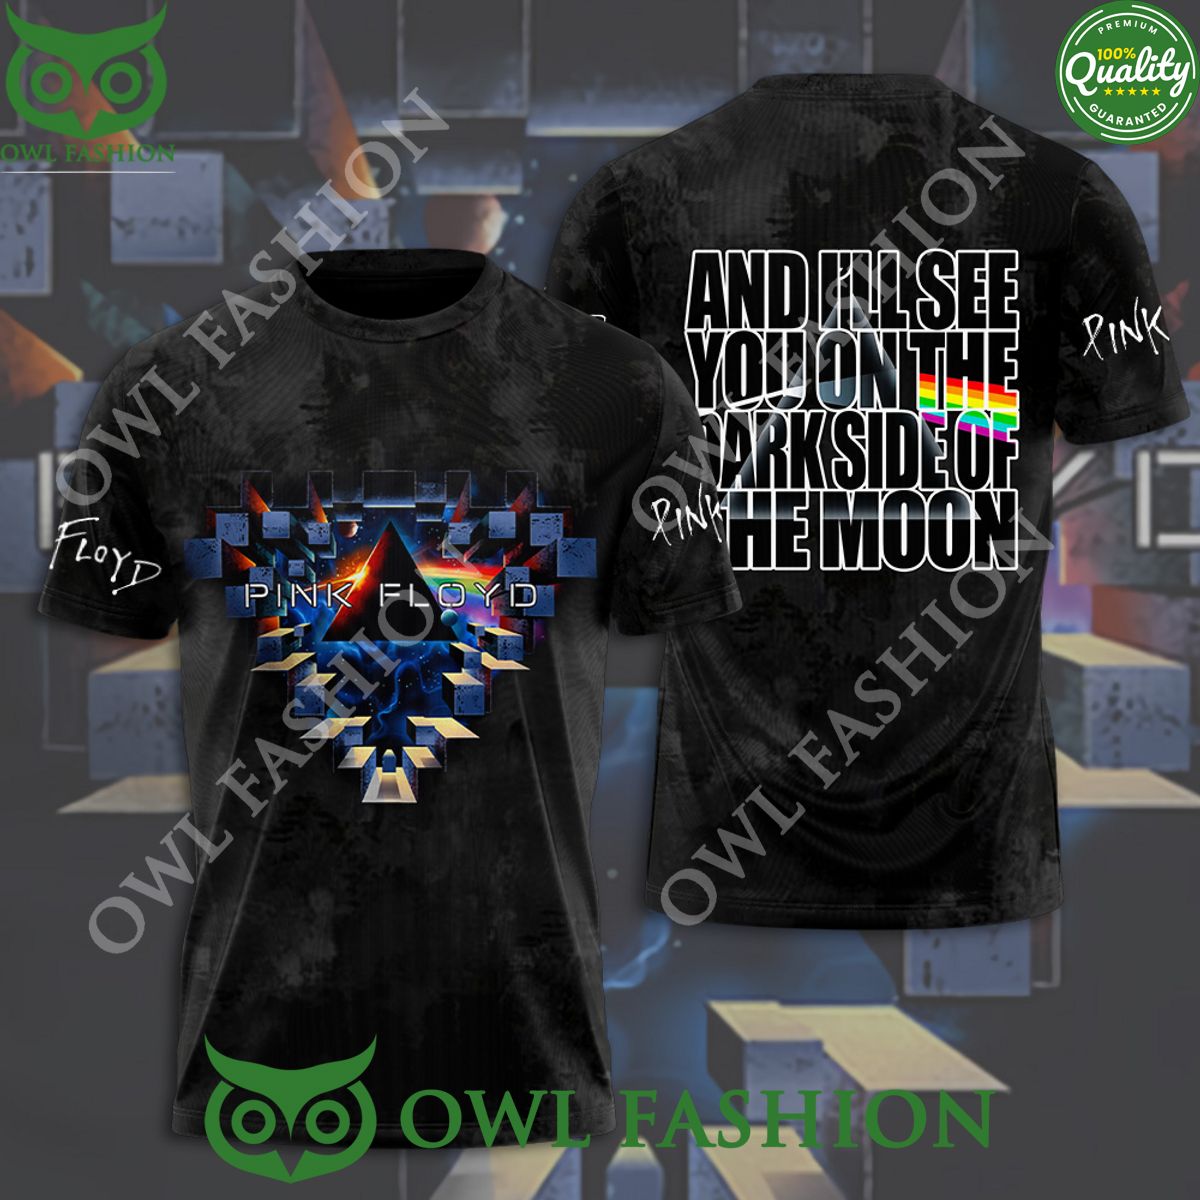 Pink Floyd And I'll see you on the dark side of the moon 3D Shirt